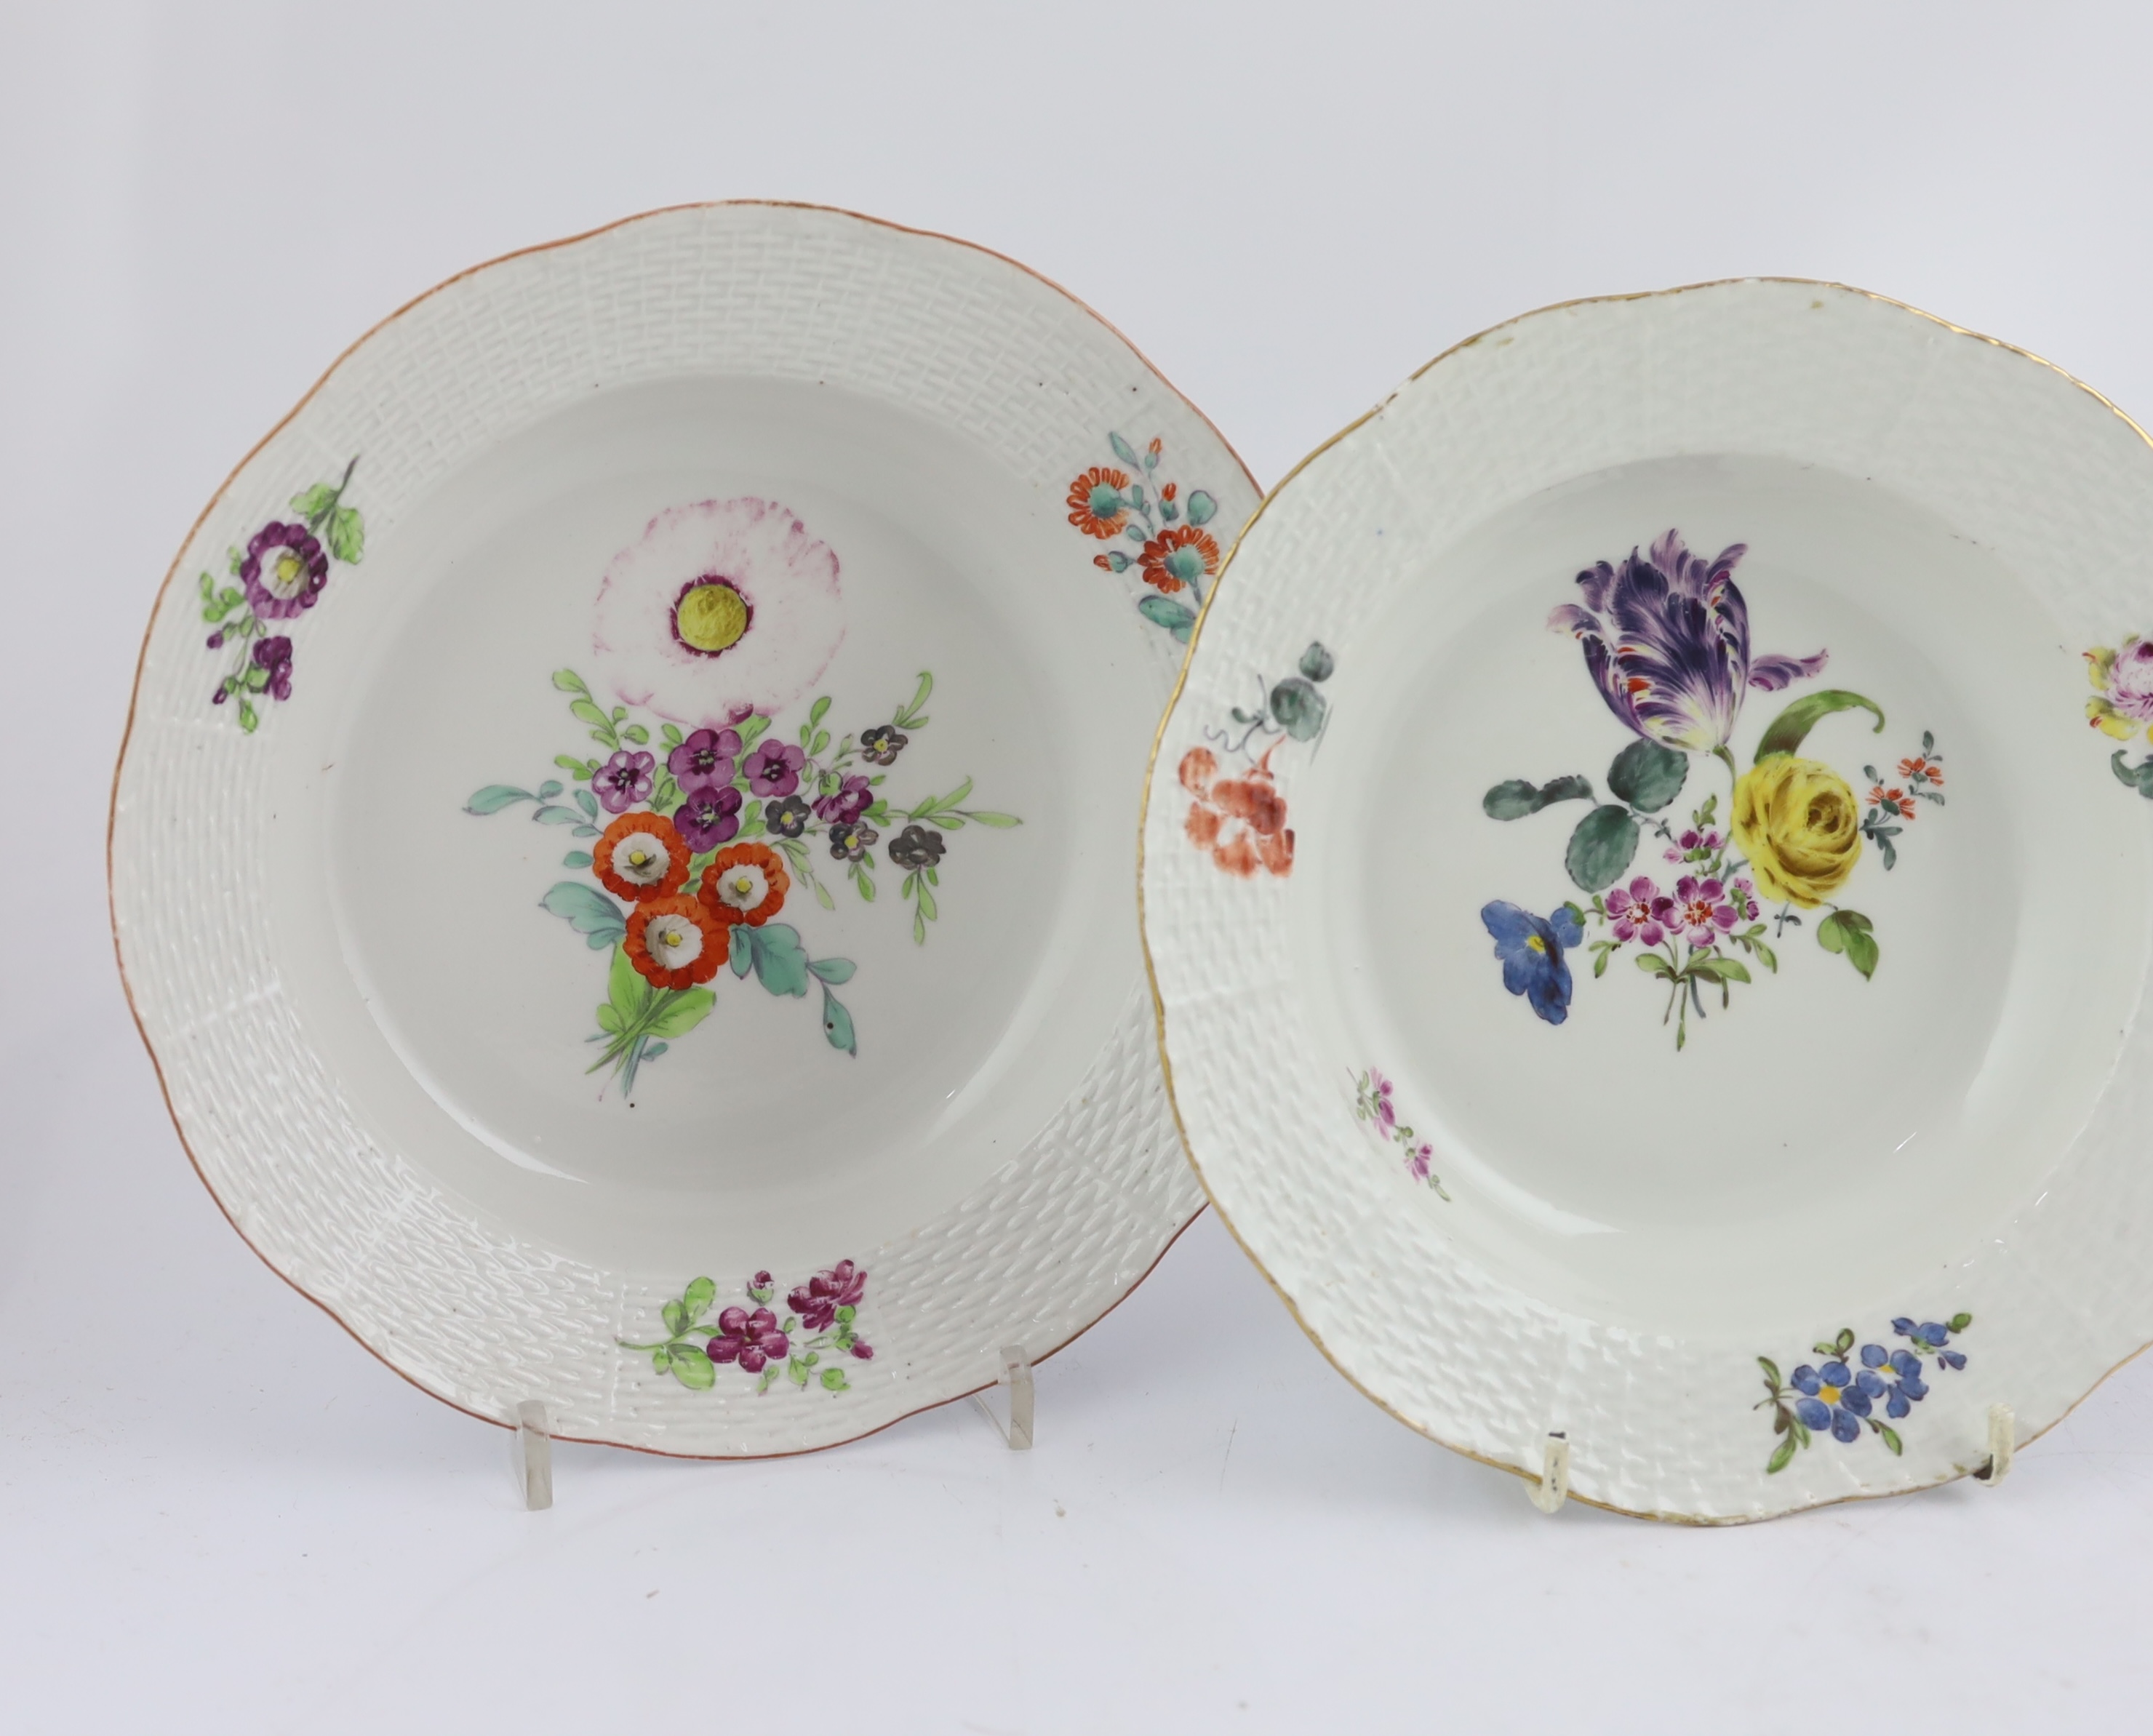 Three Russian Imperial porcelain soup plates from Catherine the Great (1762-96) ‘Everyday Service’ and one similar Meissen soup plate